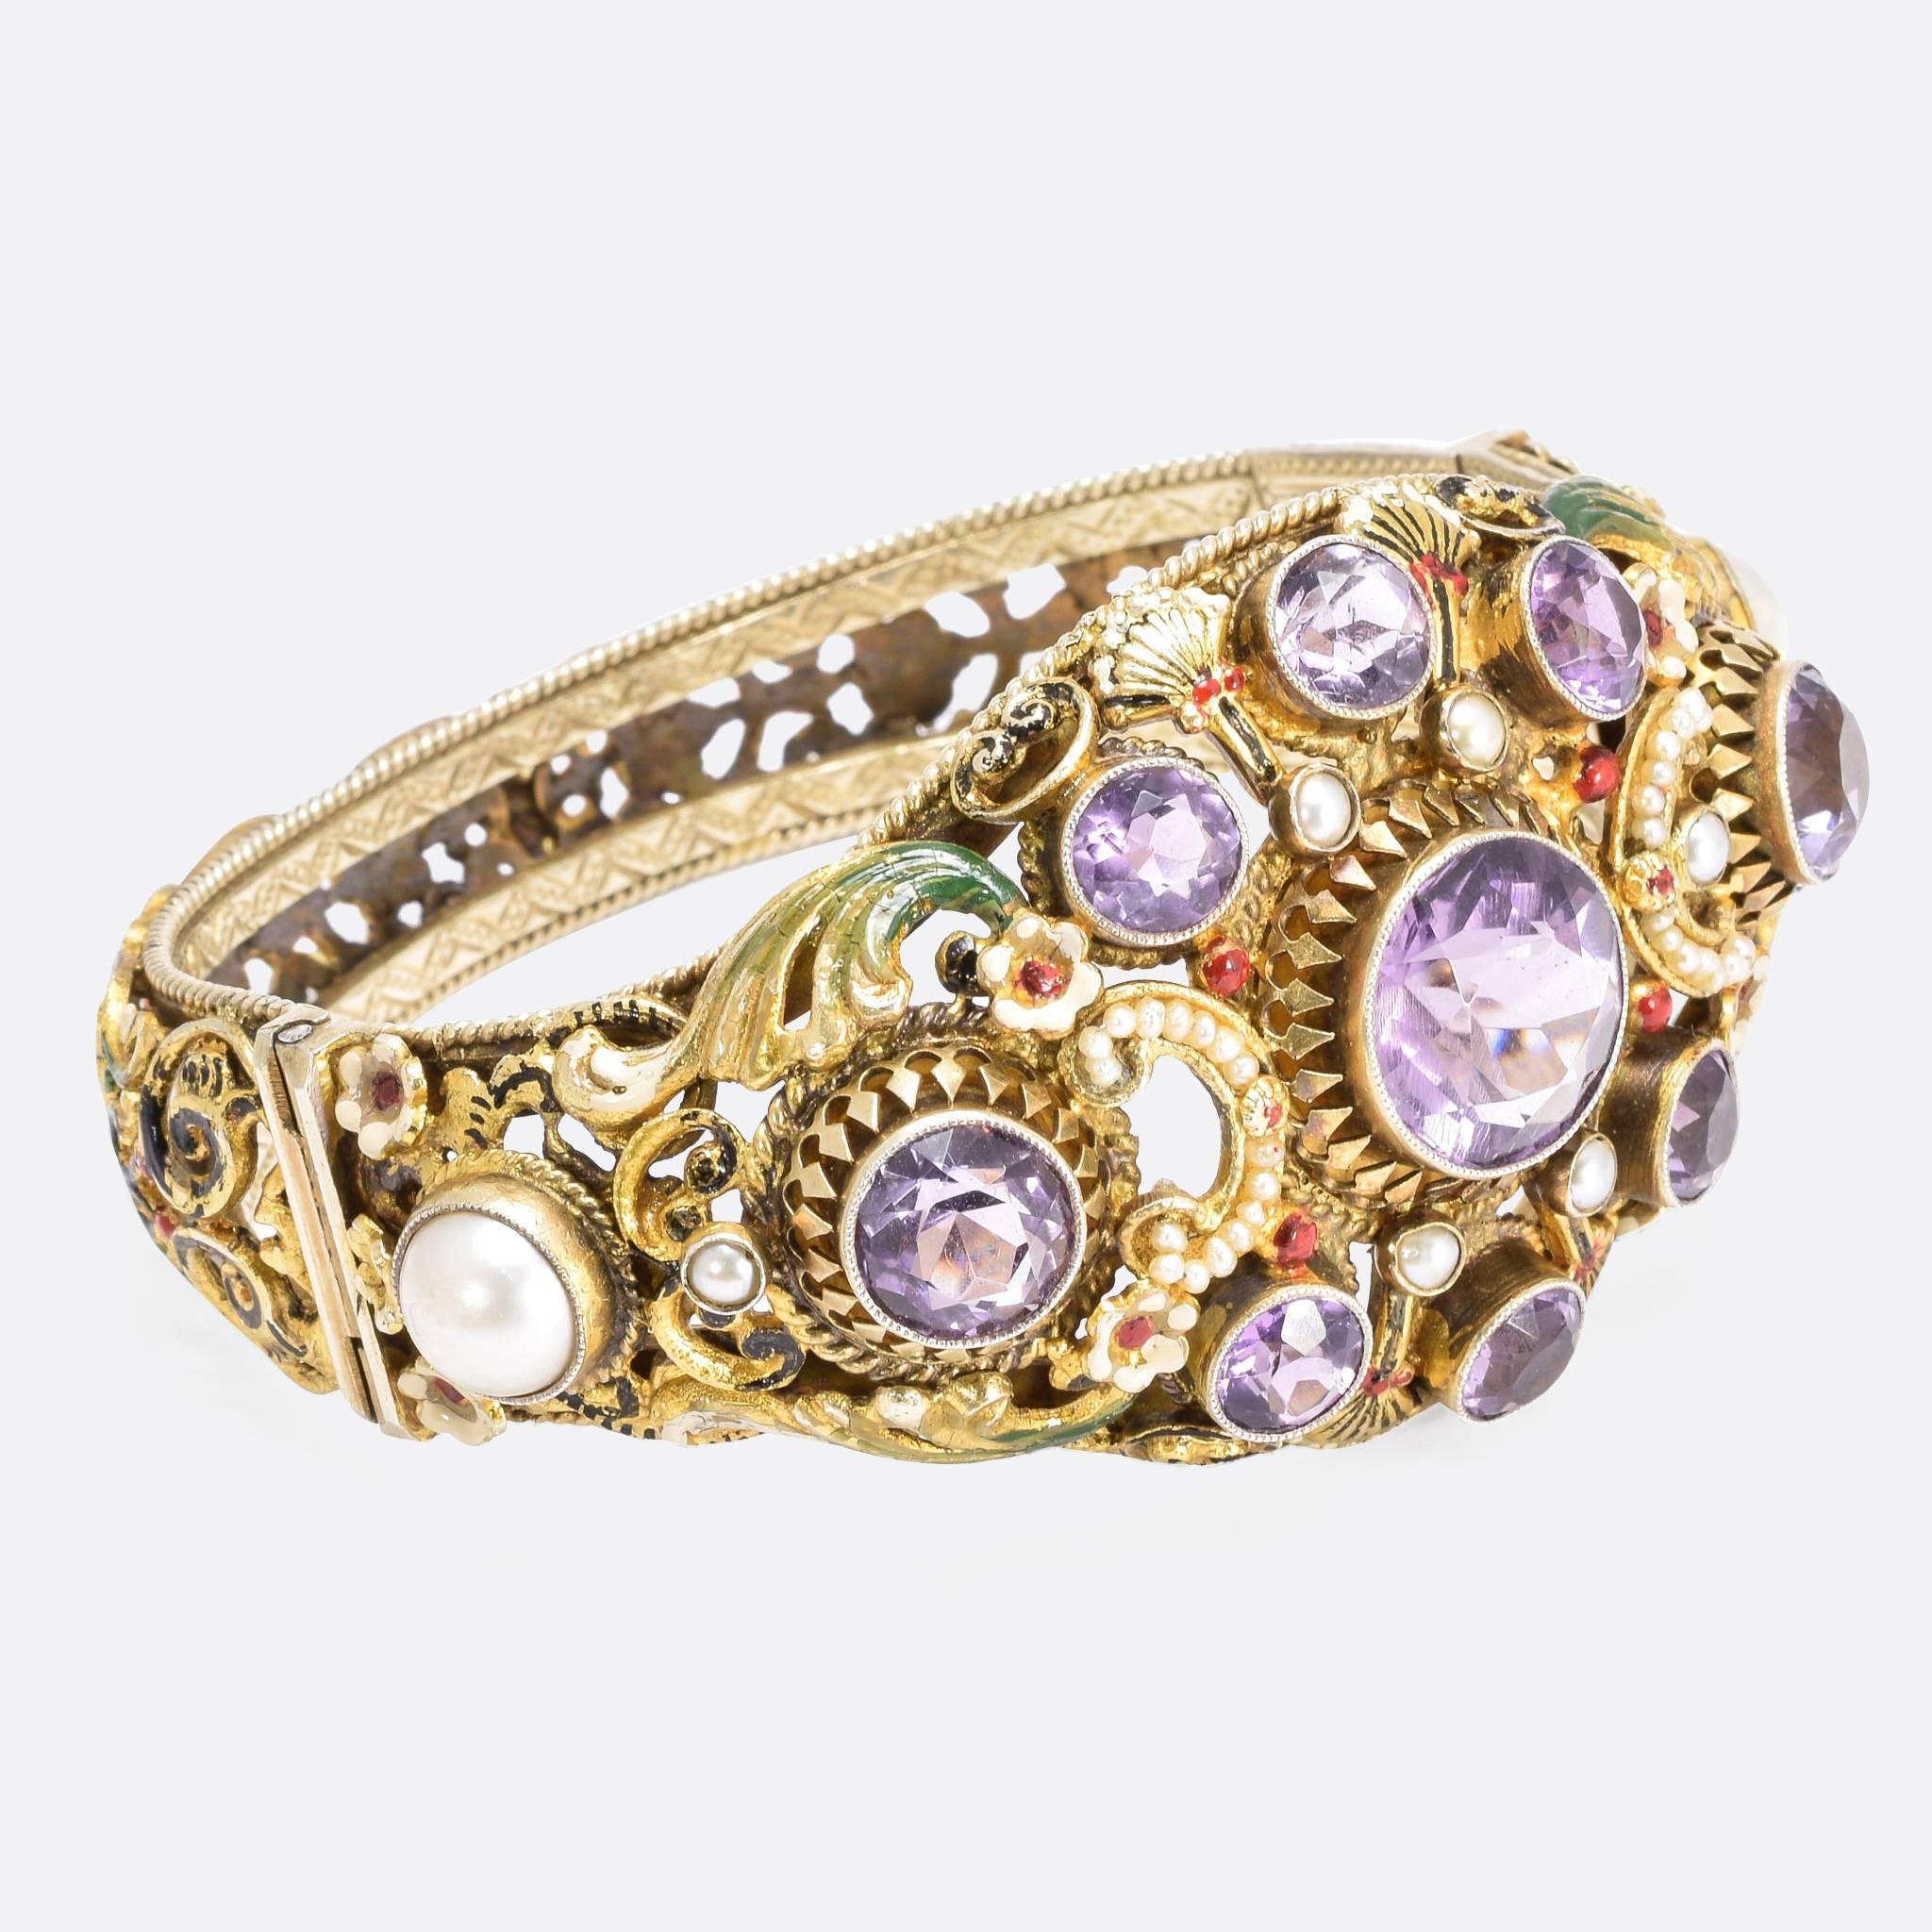 A stunning ornate enamelled bangle modelled in silver gilt. With intricate floral and foliate openwork throughout, the front is set with 9 well matched coloured amethysts, and pearls surrounding the principal stone. The colour pallet and style are